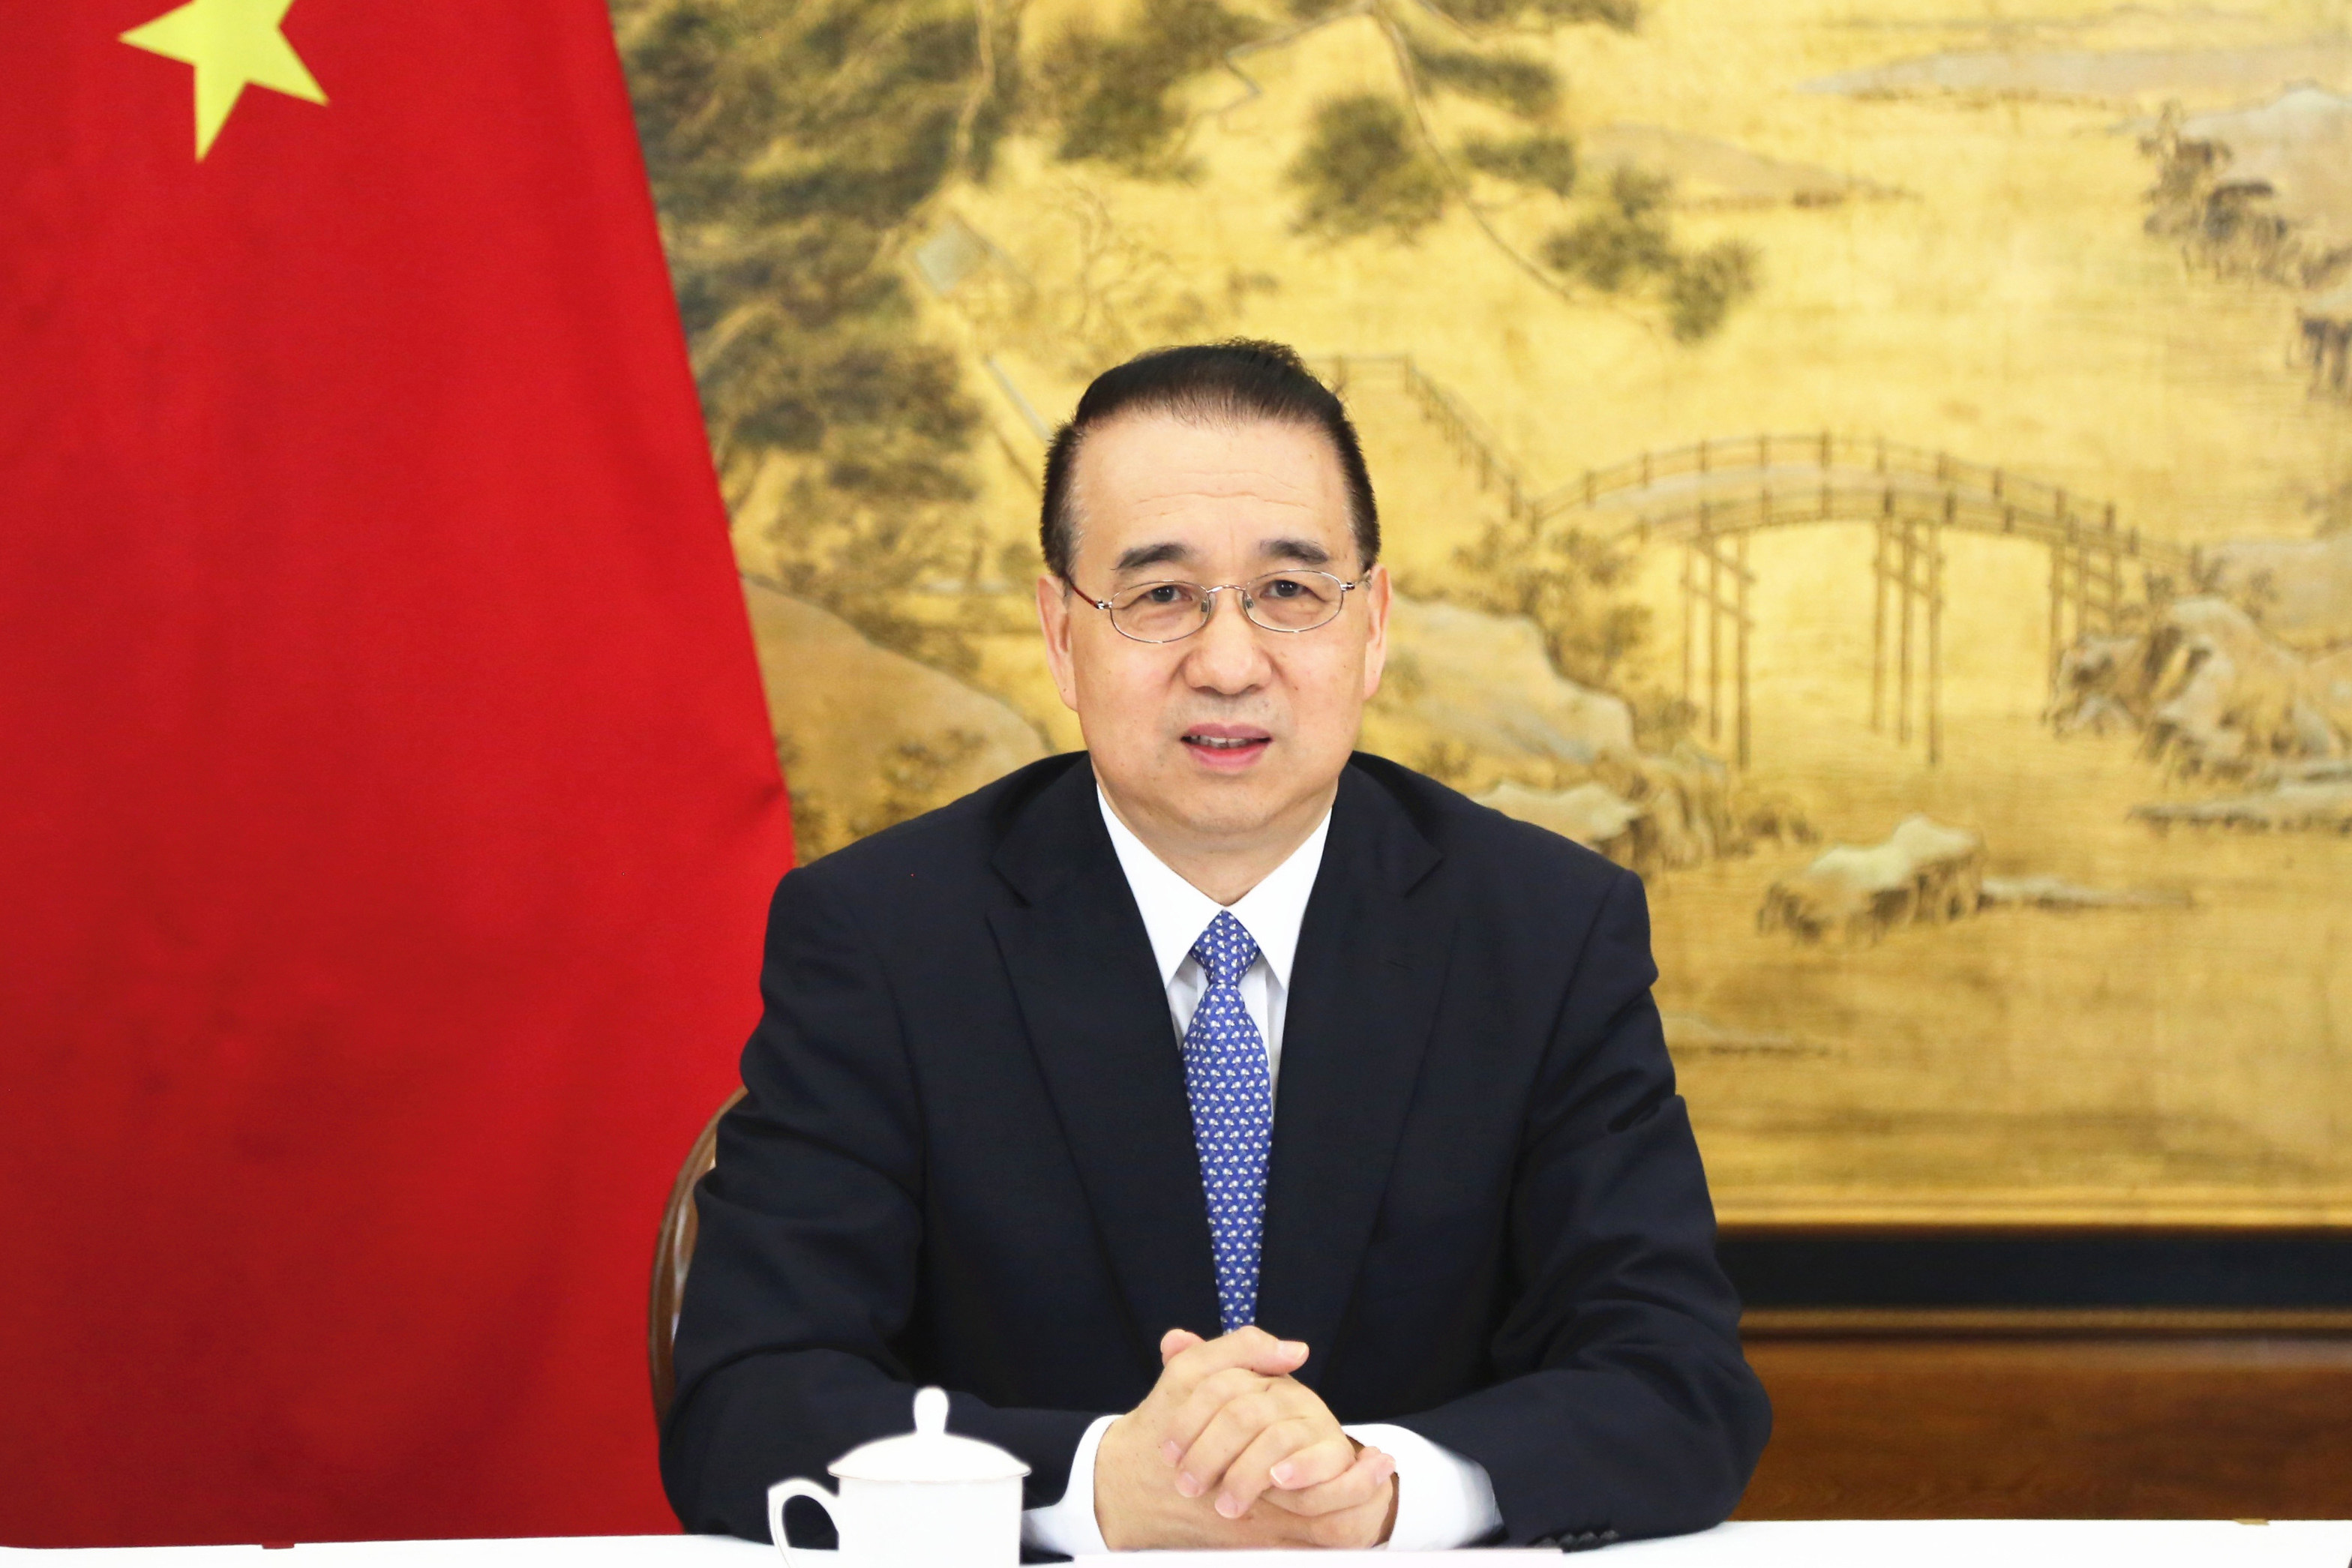 Liu Guangyuan, the Chinese foreign ministry commissioner in Hong Kong. Photo: Handout